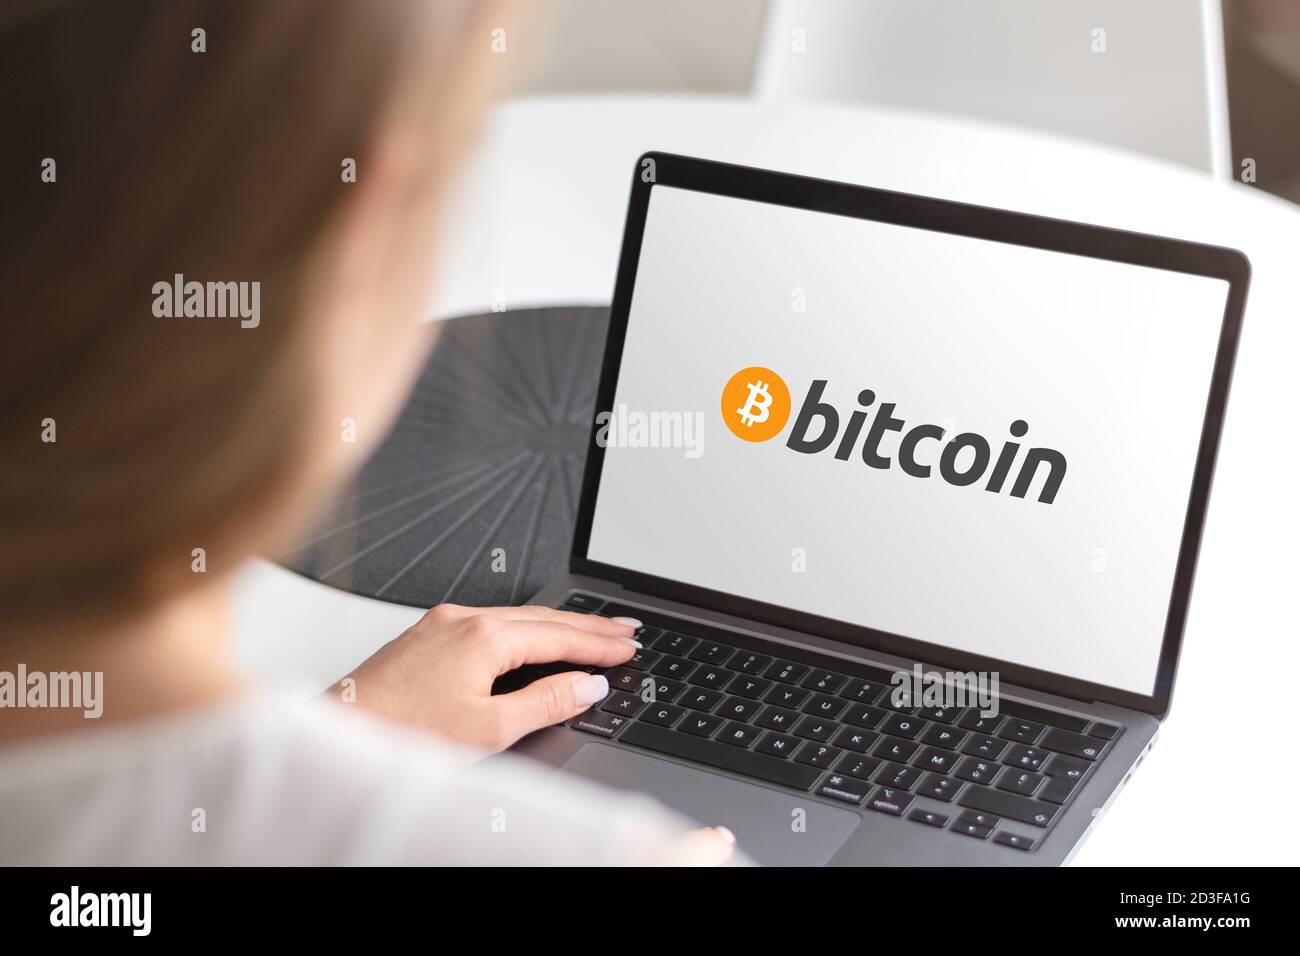 Guilherand-Granges, France - October 08, 2020. Smartphone with Bitcoin logo. Cryptocurrency. Decentralized digital currency. Stock Photo